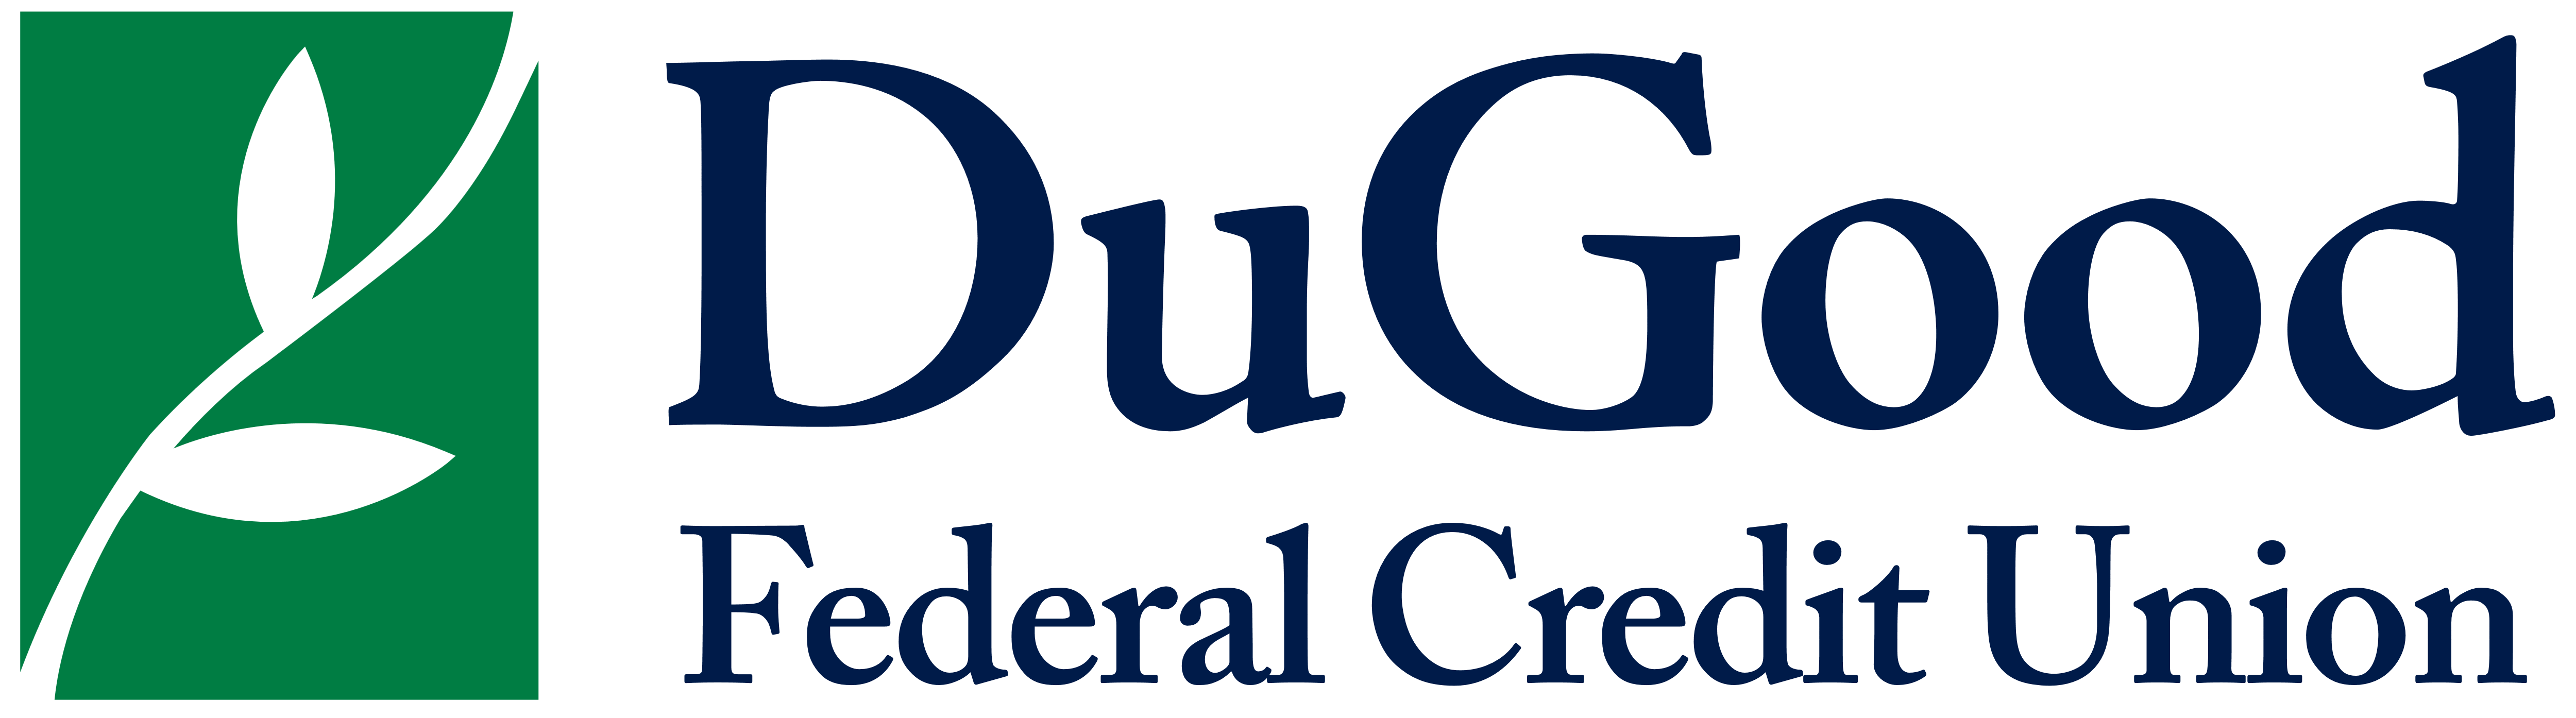 DuGood Federal Credit Union Logos Download